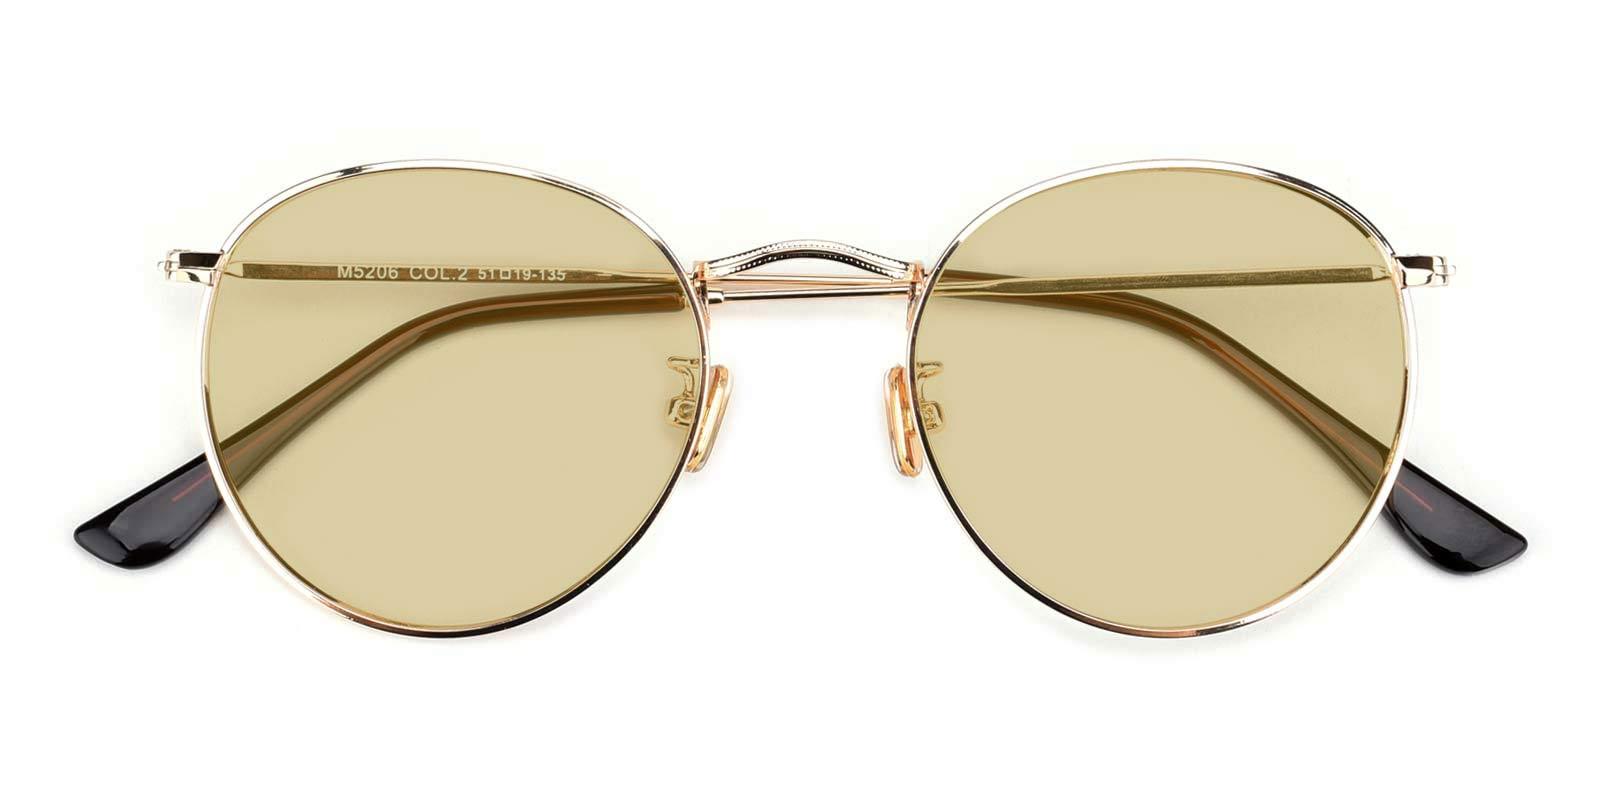 Canary-Gold-Round-Metal-Sunglasses-detail